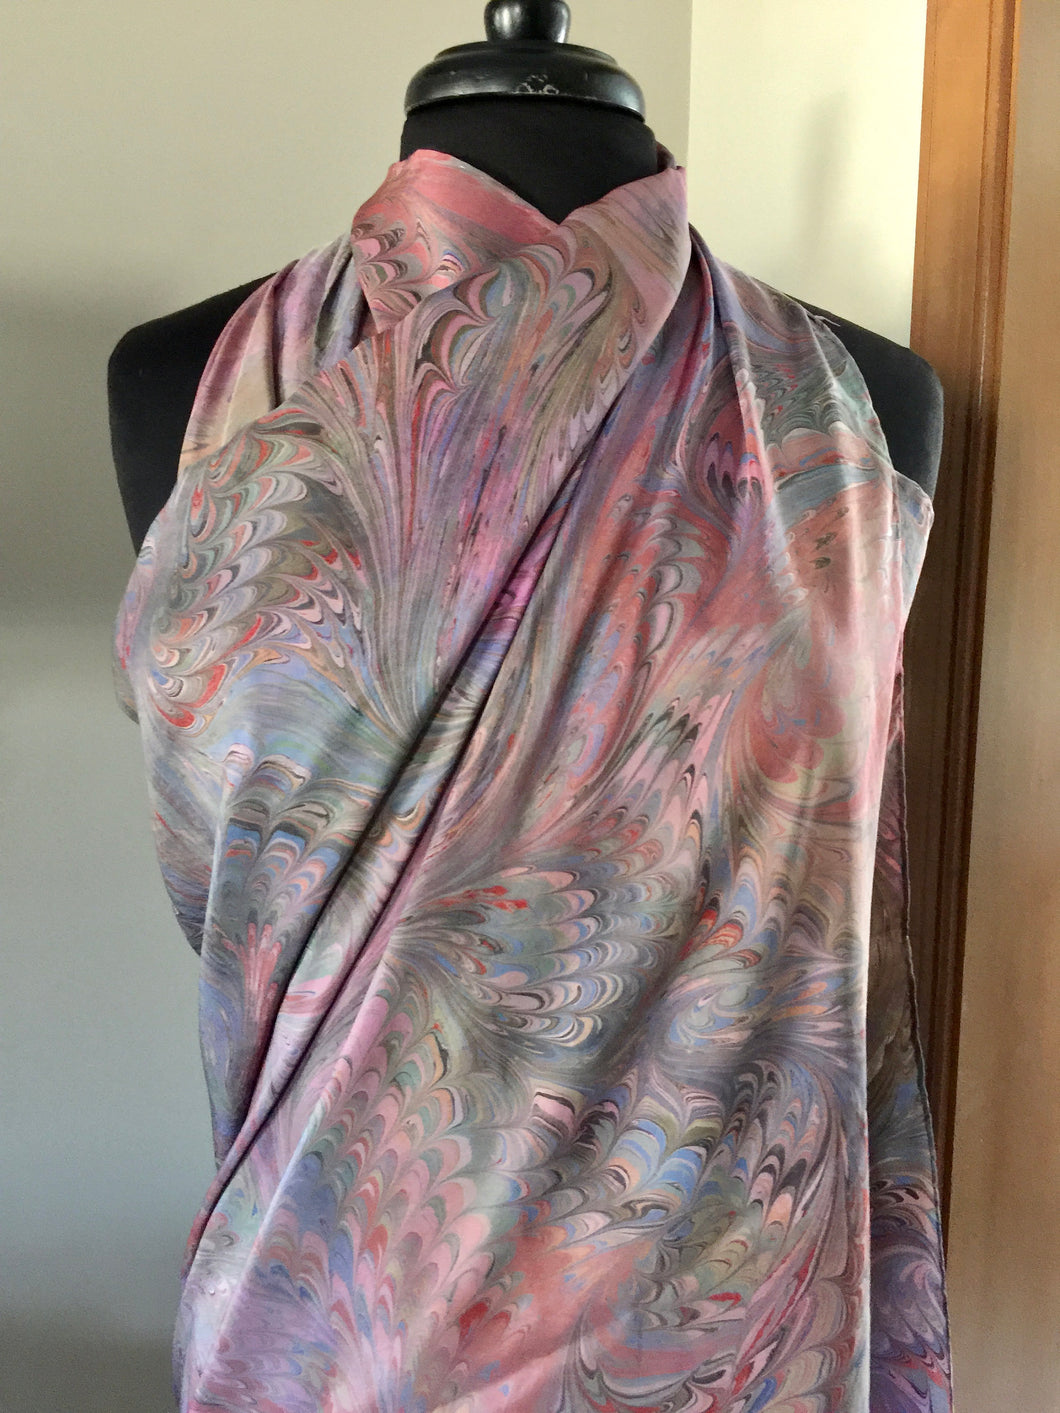 Multicolored Sarong Wrap 44x69 water marbled Habotai Silk combed and swirled pattern.